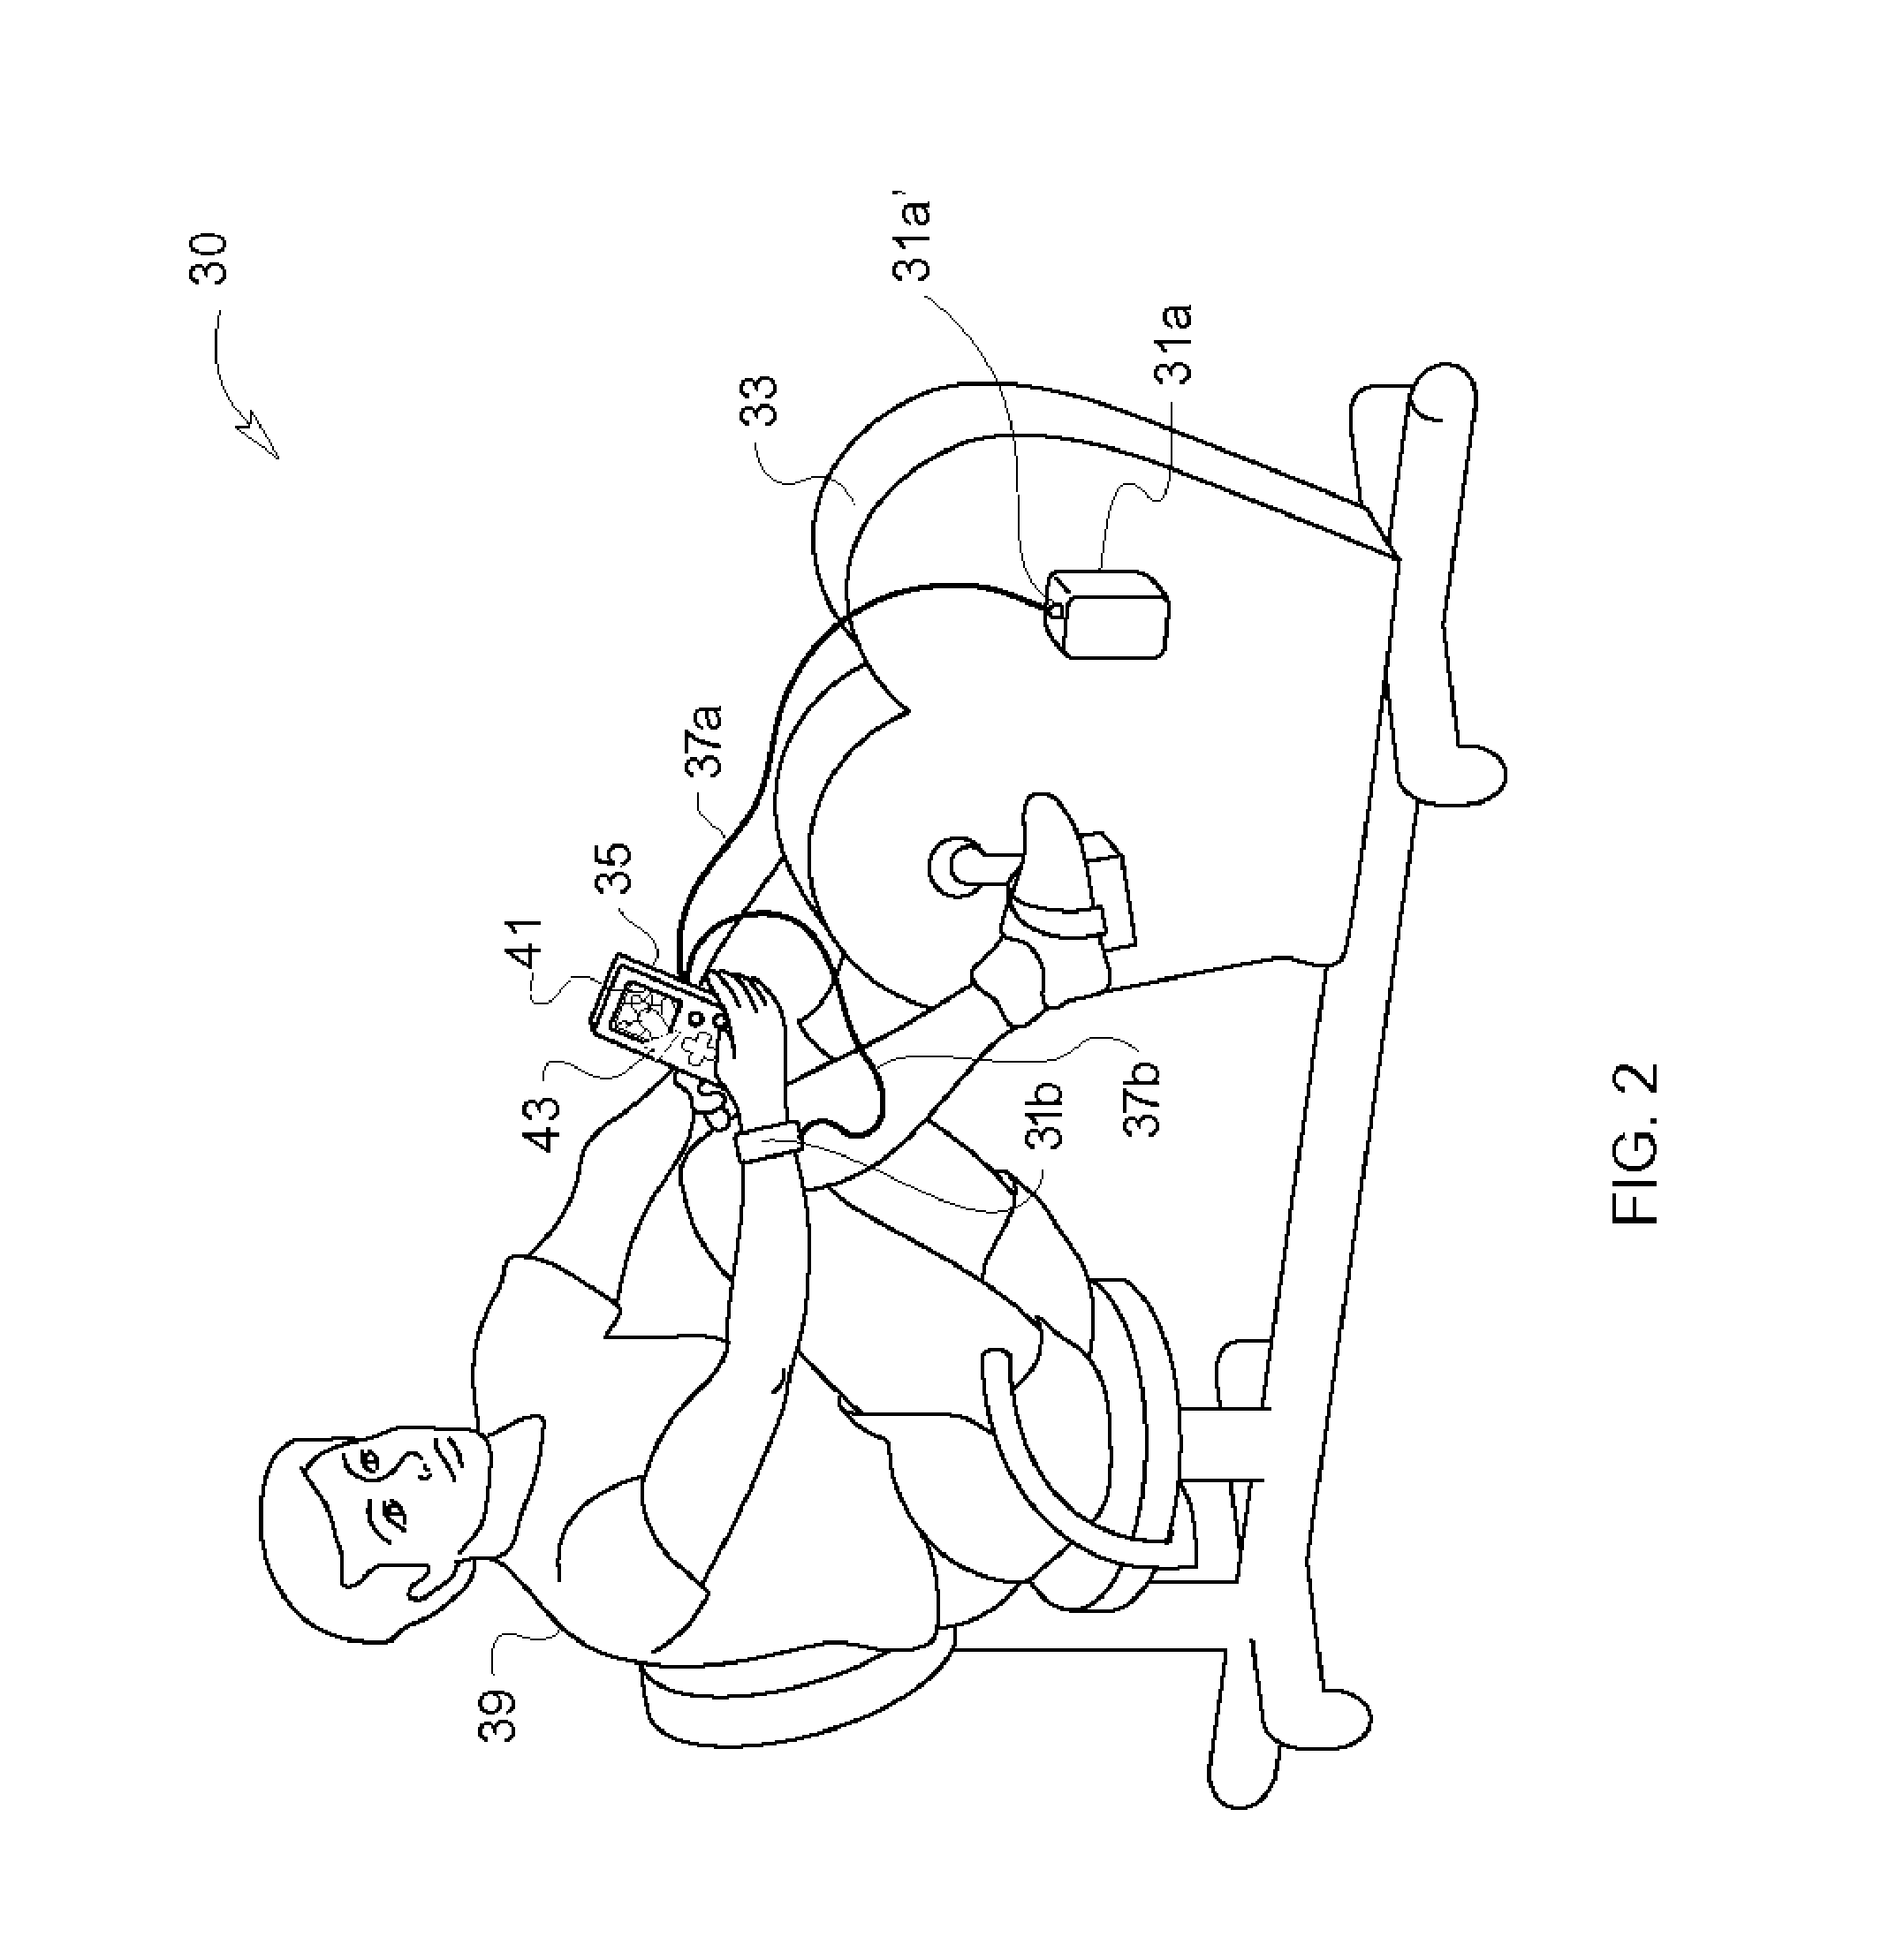 Systems and methods for improving fitness equipment and exercise